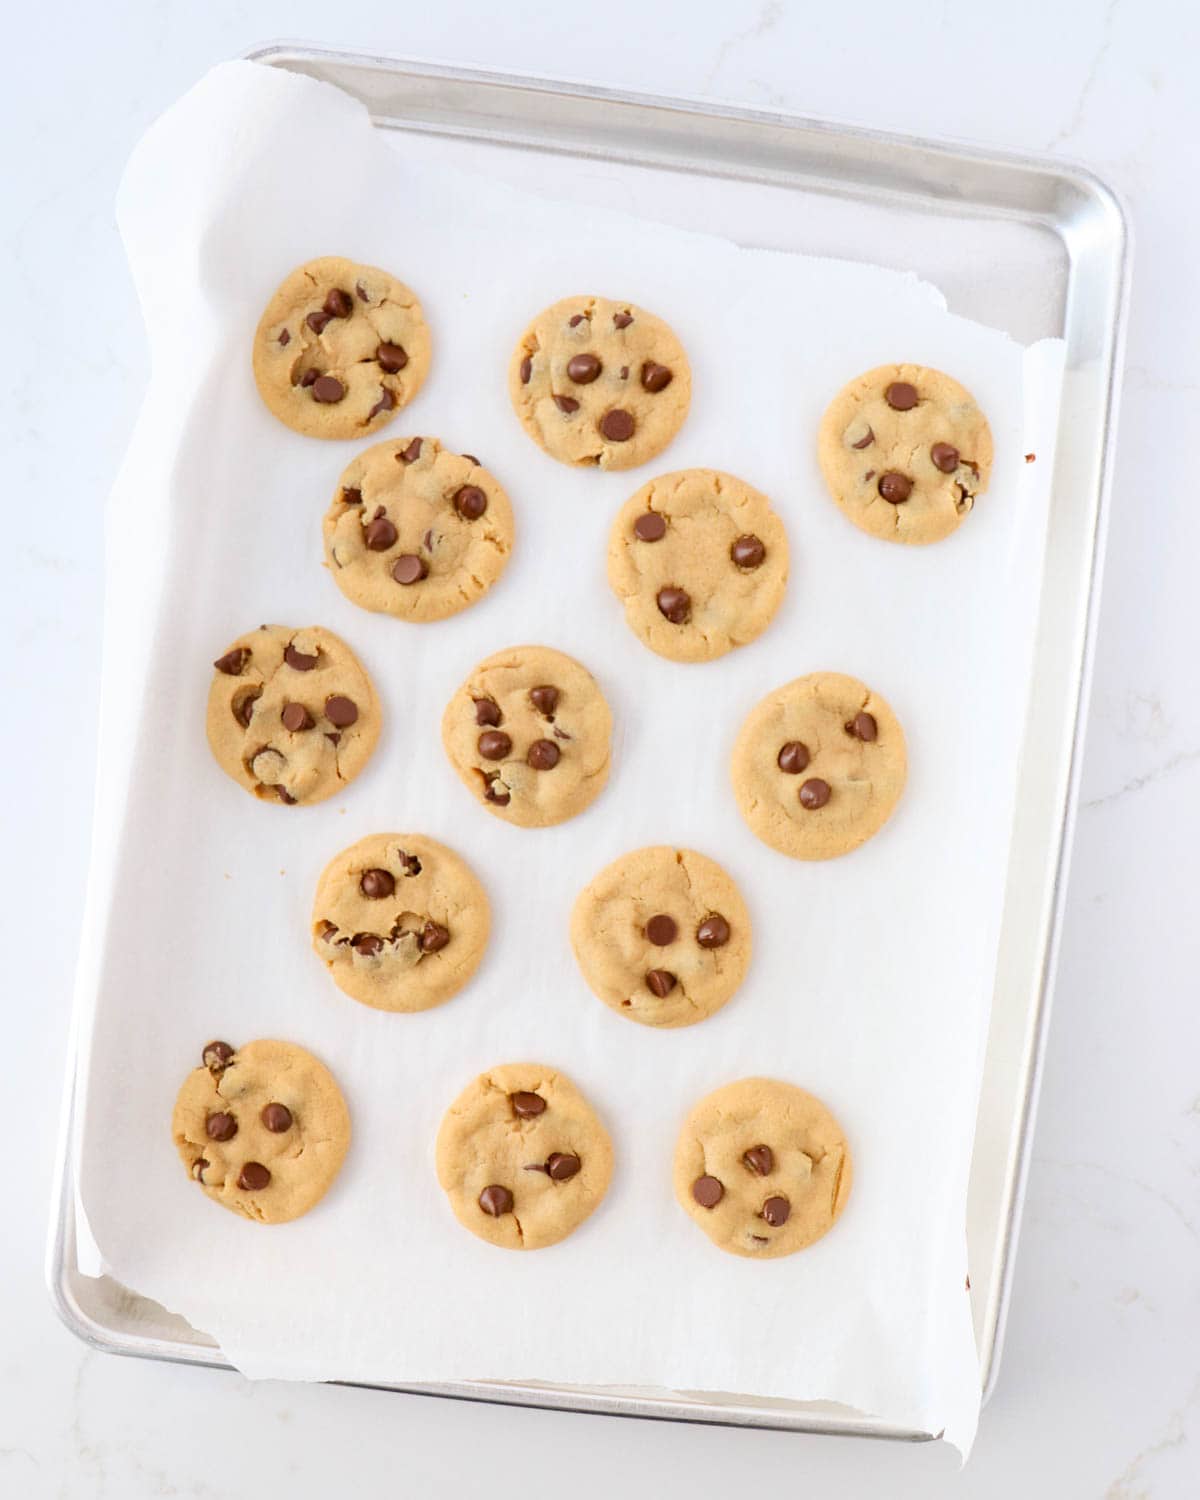 Baked cookies topped with chocolate chips on a baking pan.